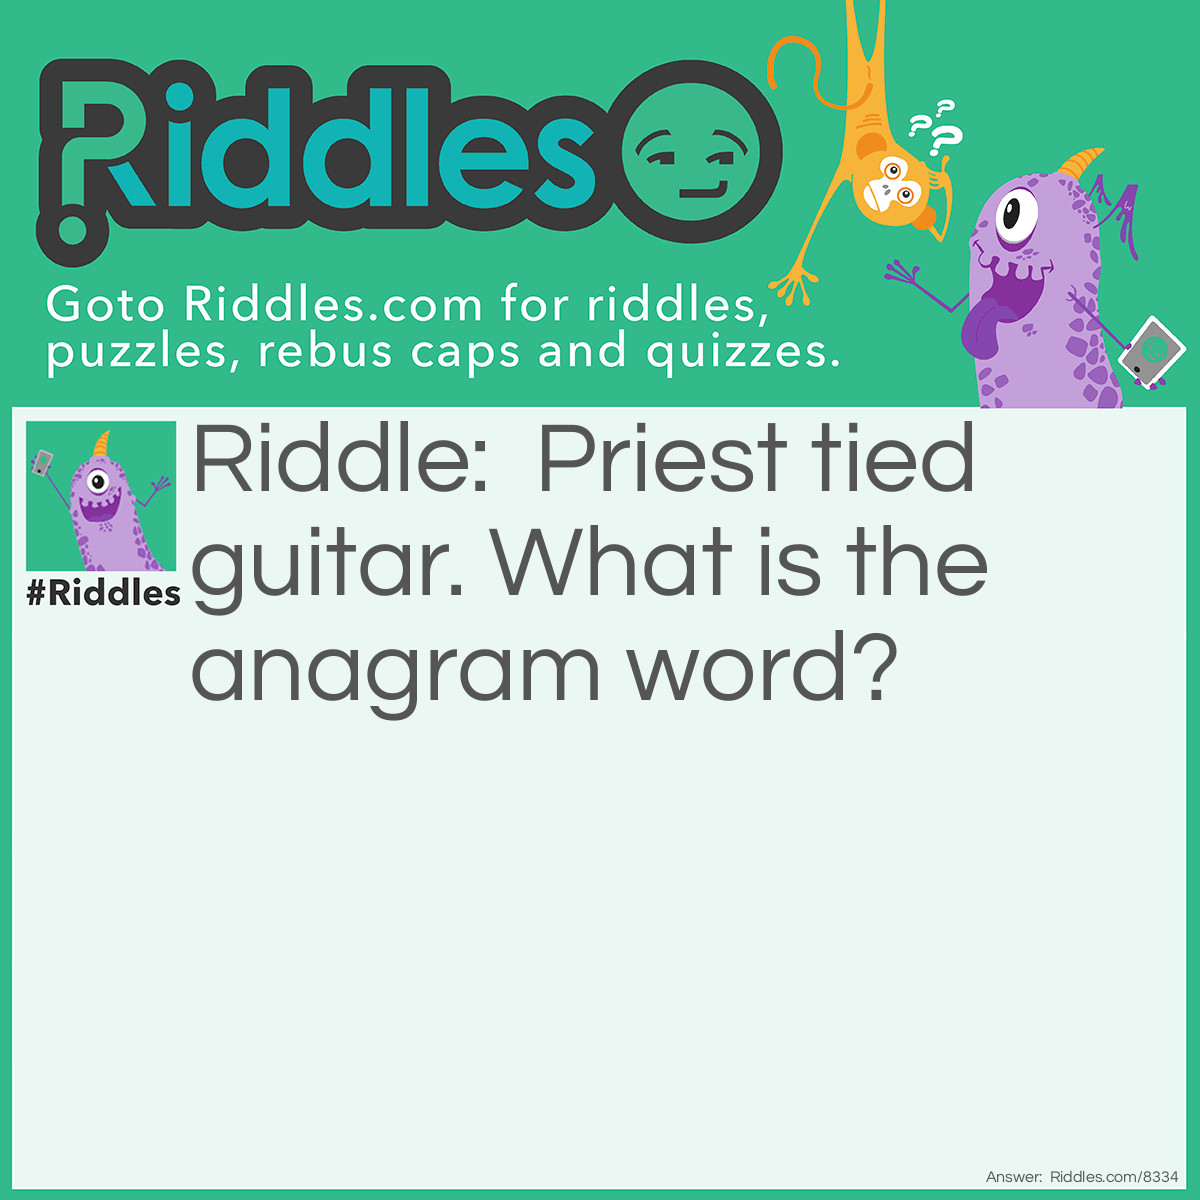 Riddle: Priest tied guitar. What is the anagrammed word? Answer: Prestidigitateur.